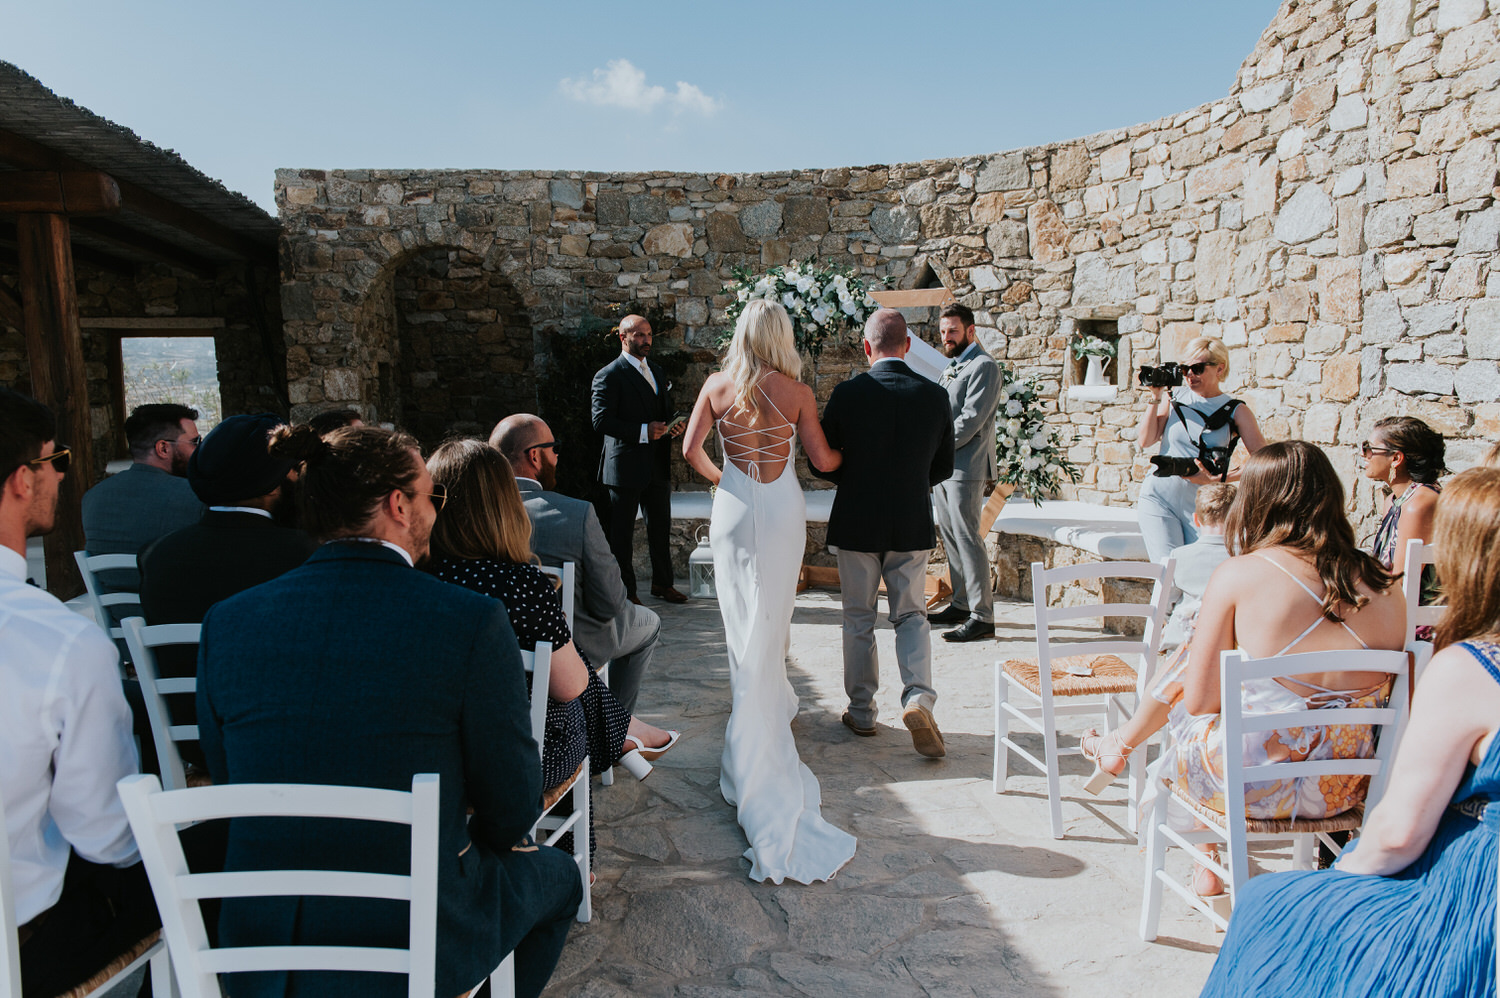 Mykonos wedding photographer: bride walking down the aisle as her beautiful dress' train trails behind her and the groom looks at her.